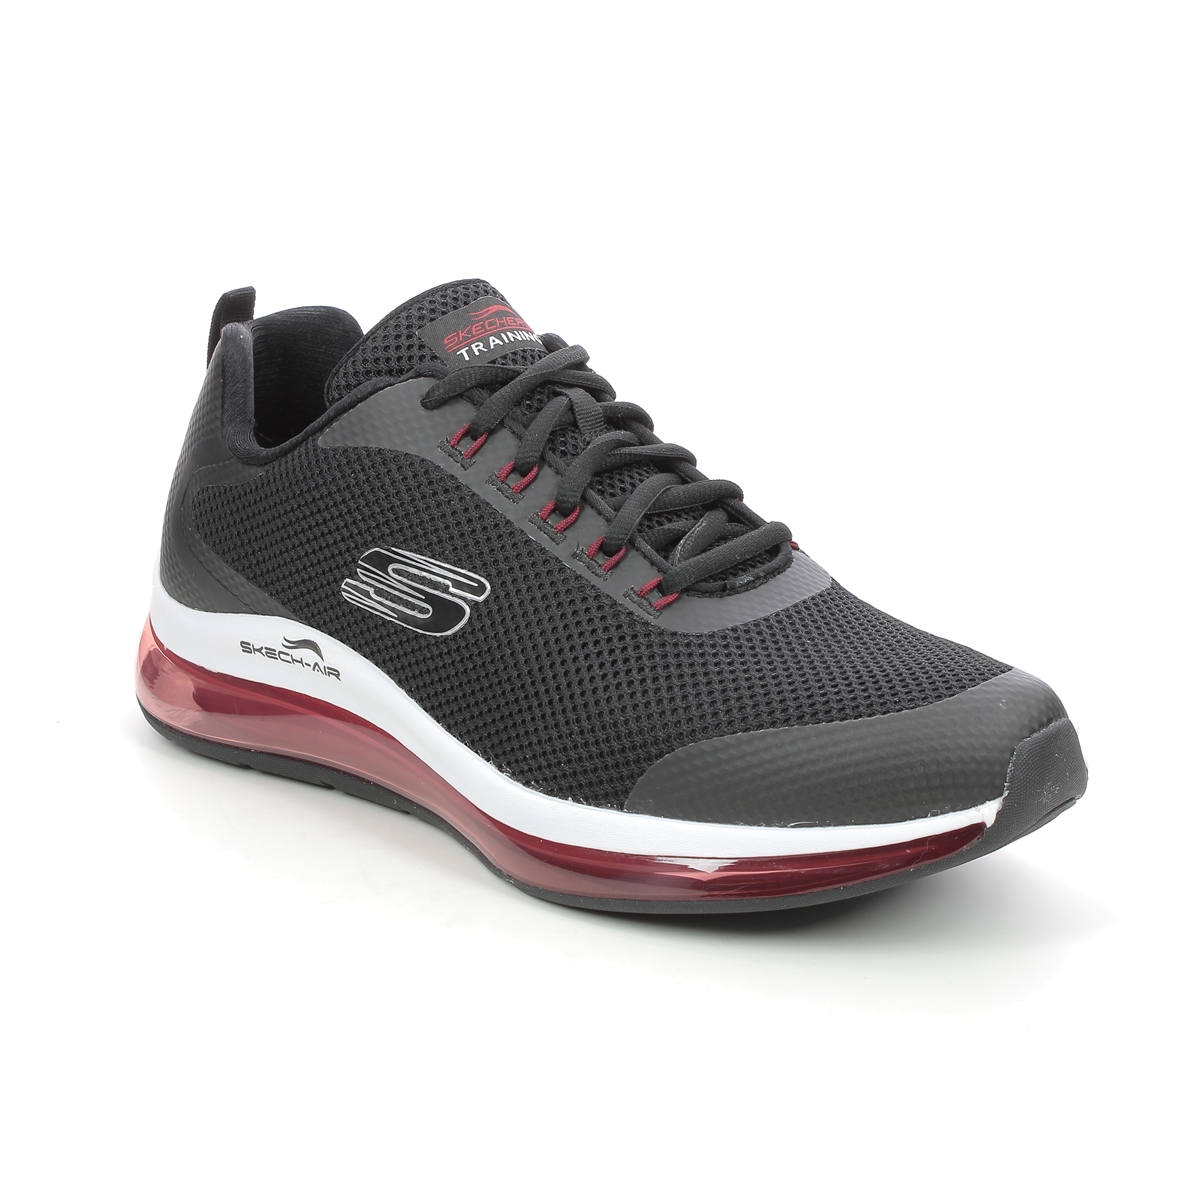 Skechers Skech Air 2 Mens Black Red Mens Trainers 232036 In Size 8 In Plain Black Red